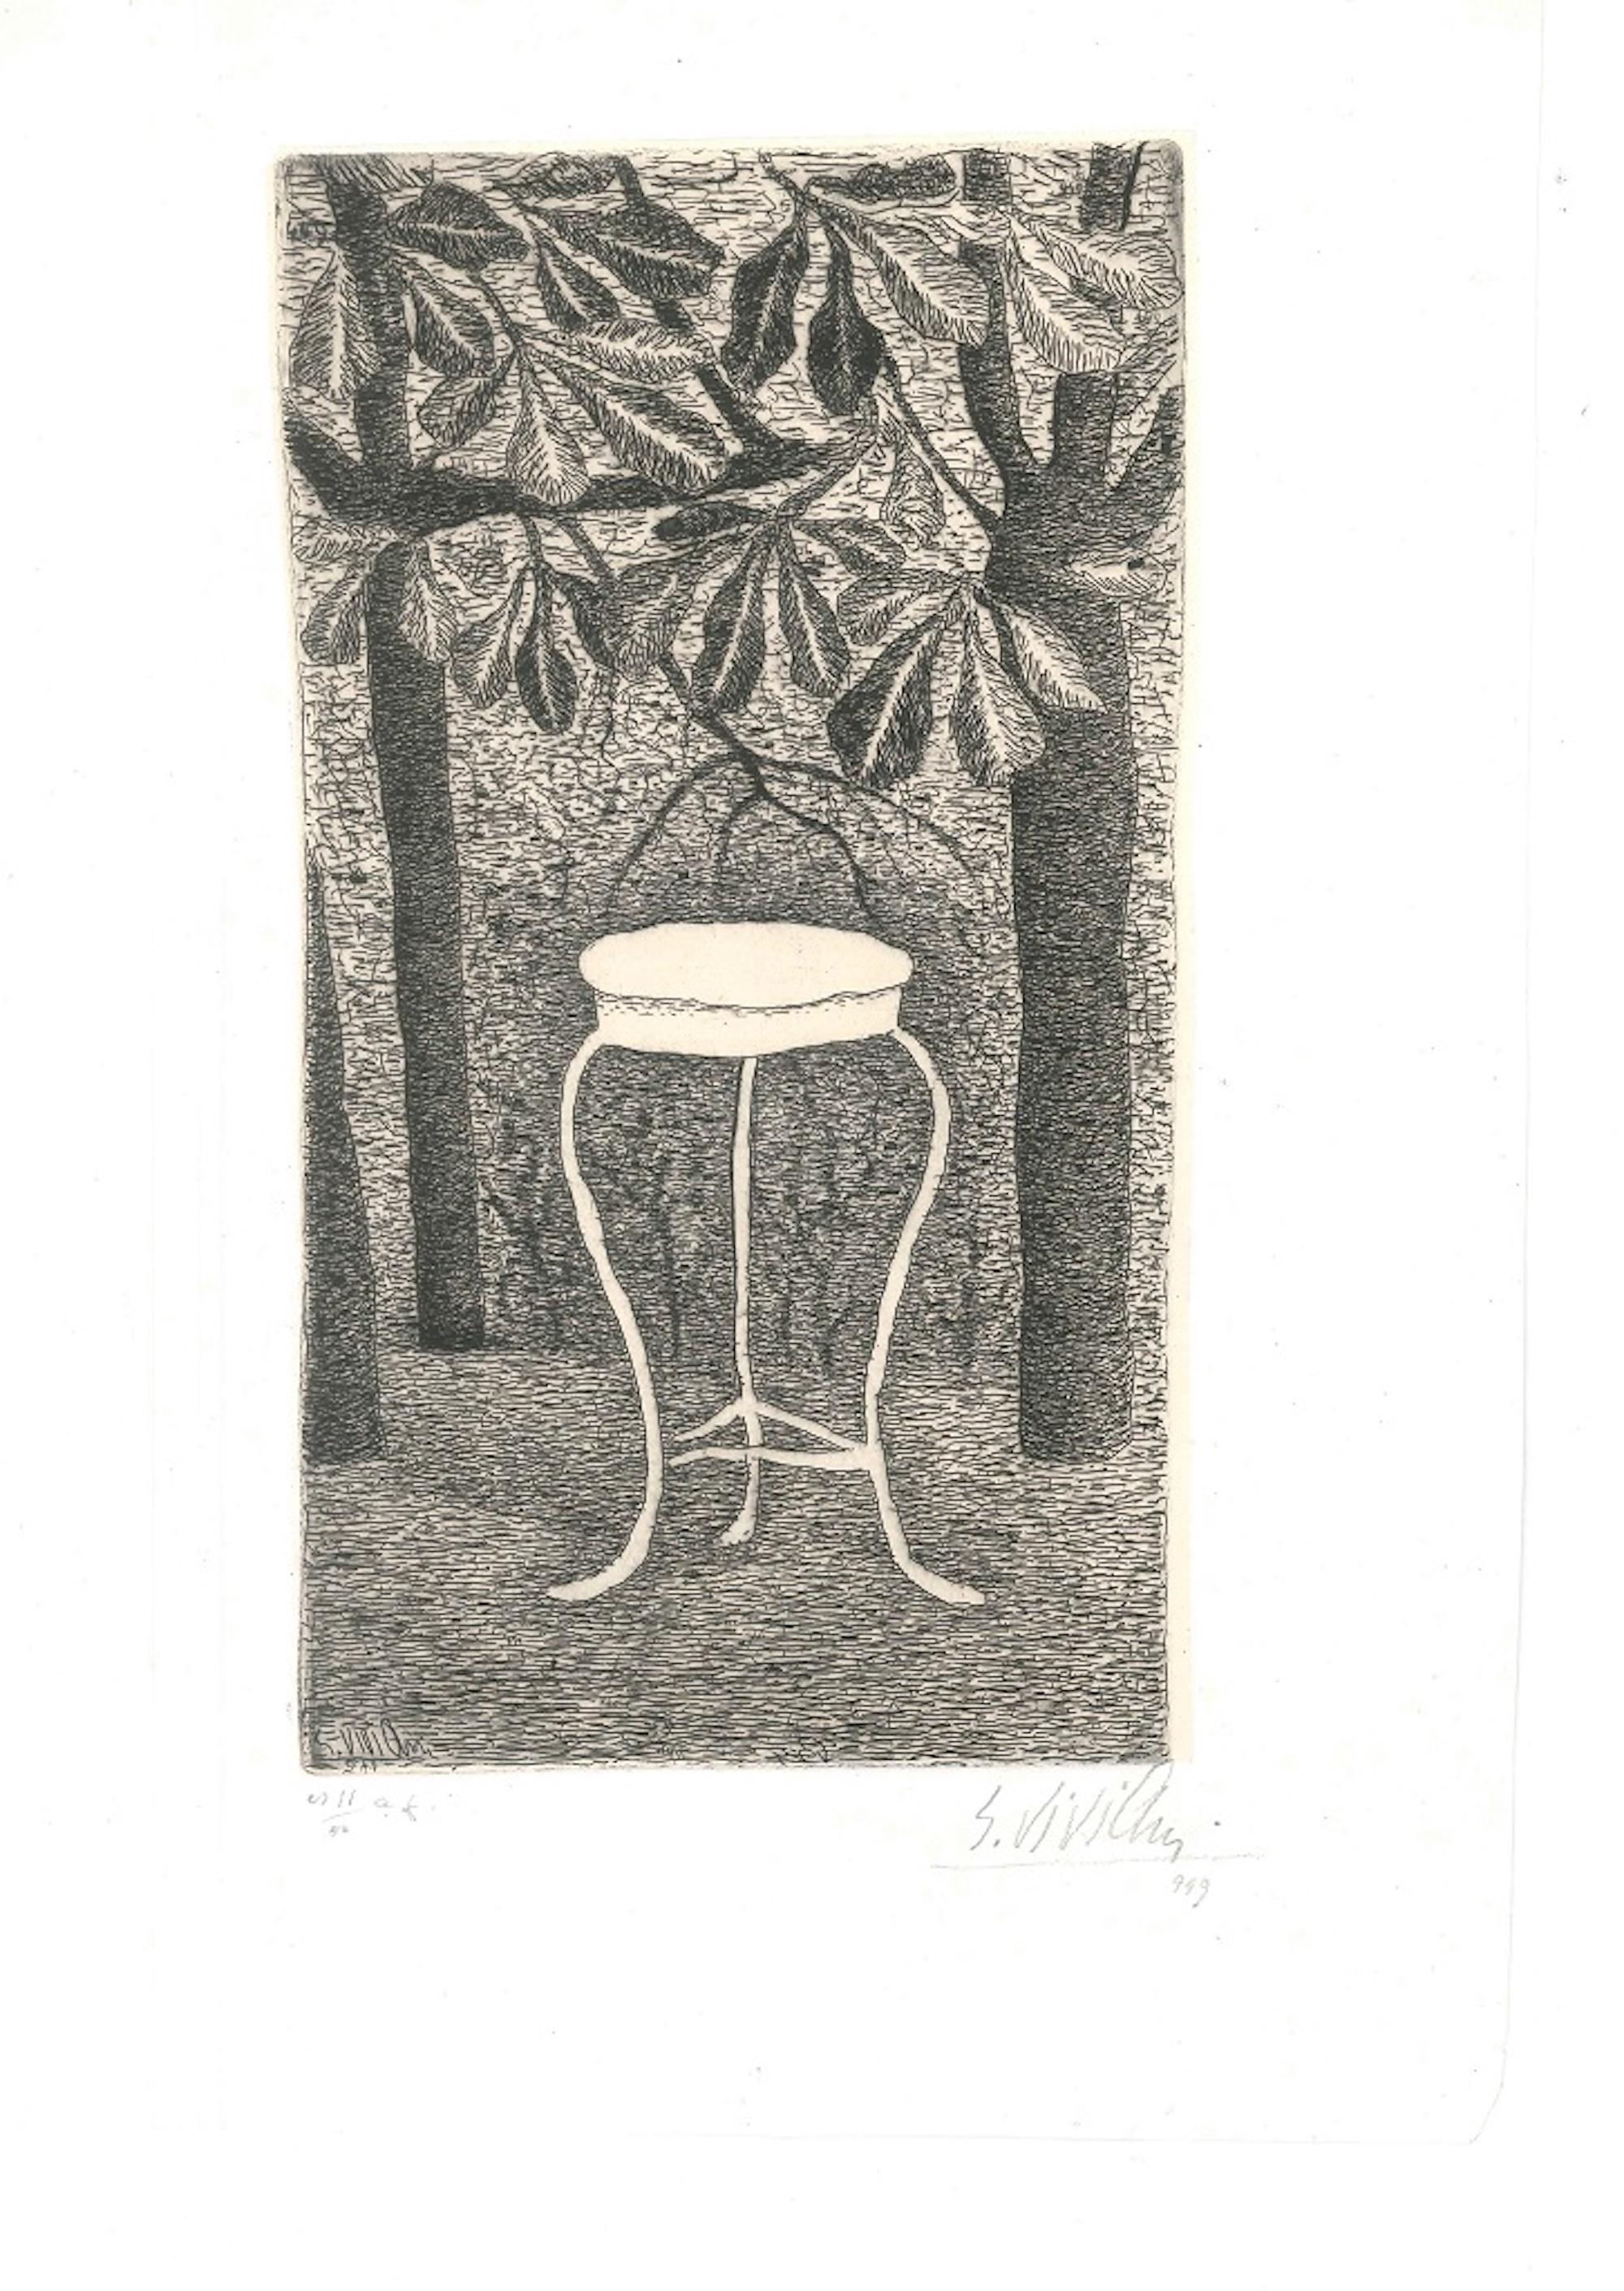 Table In The Wood is an original black and white etching by Giuseppe Viviani realized in 1949.

Hand-signed and dated aby the artist in pencil on the lower right. Numbered in pencil on the lower left. Edition of 50. Signed and dated on plate.